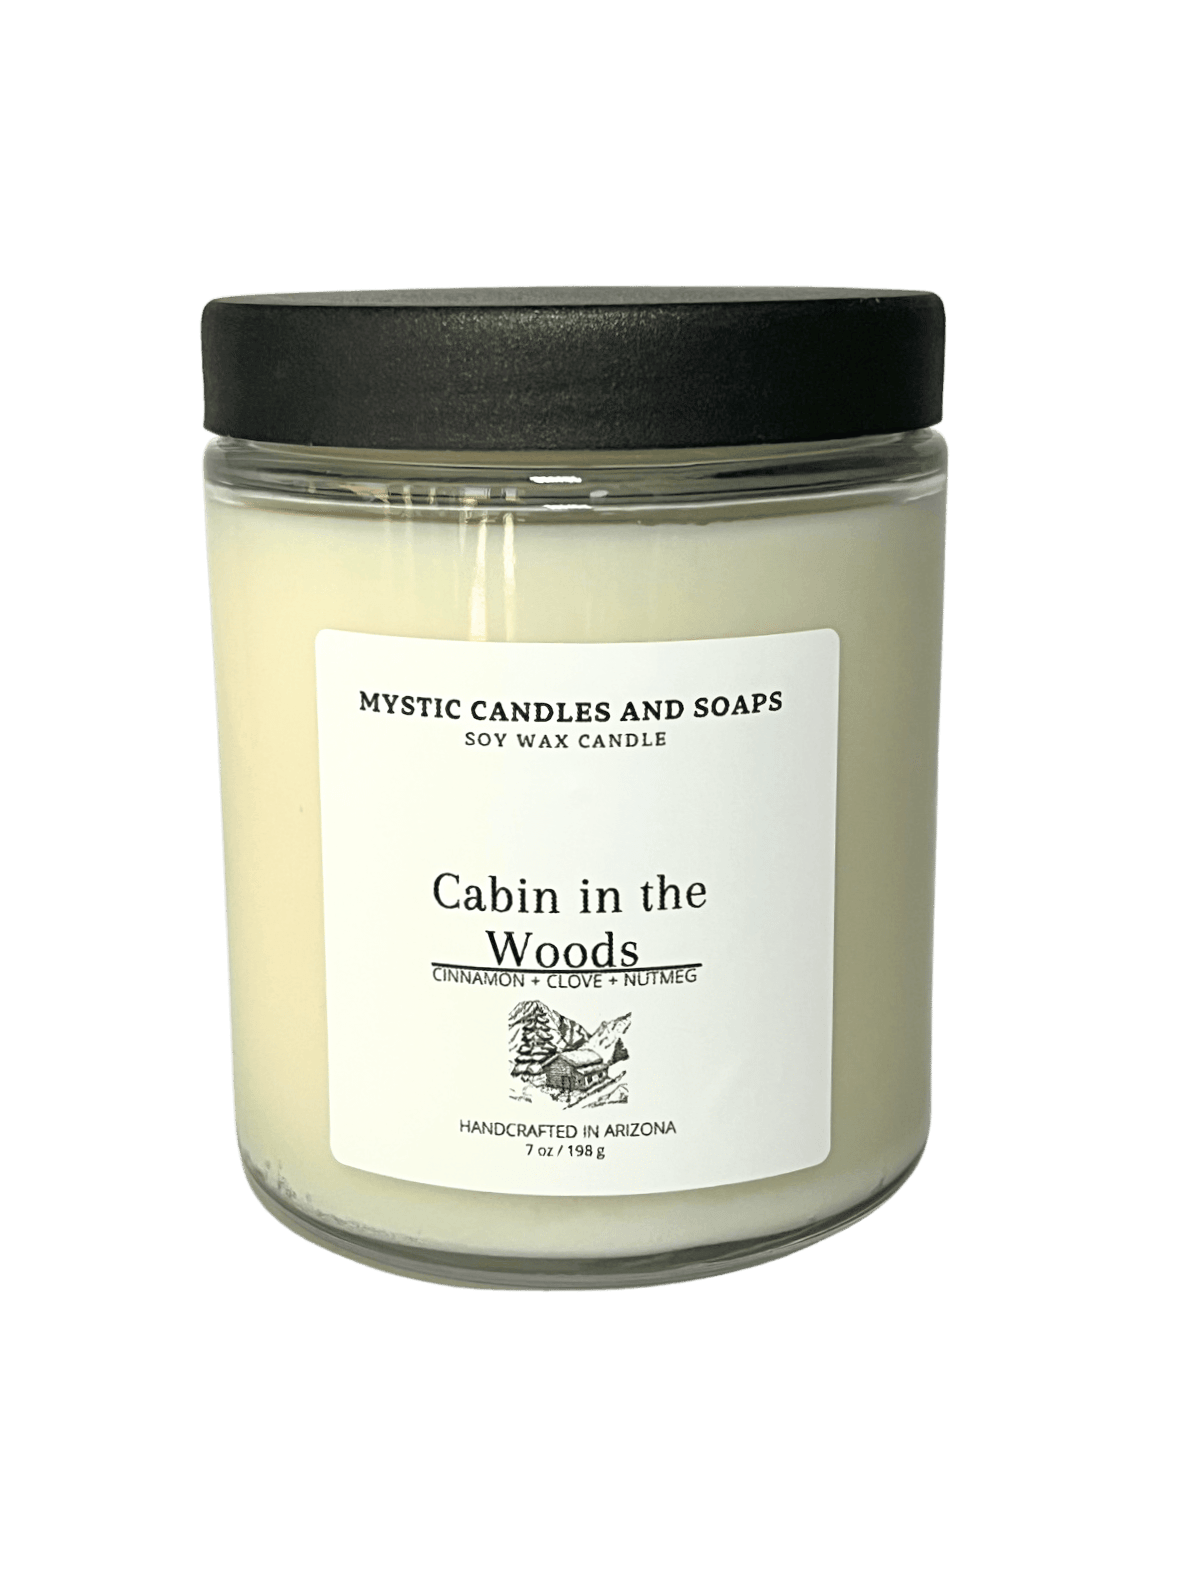 Cabin in the Woods Candle - Mystic Candles and Soaps LLC